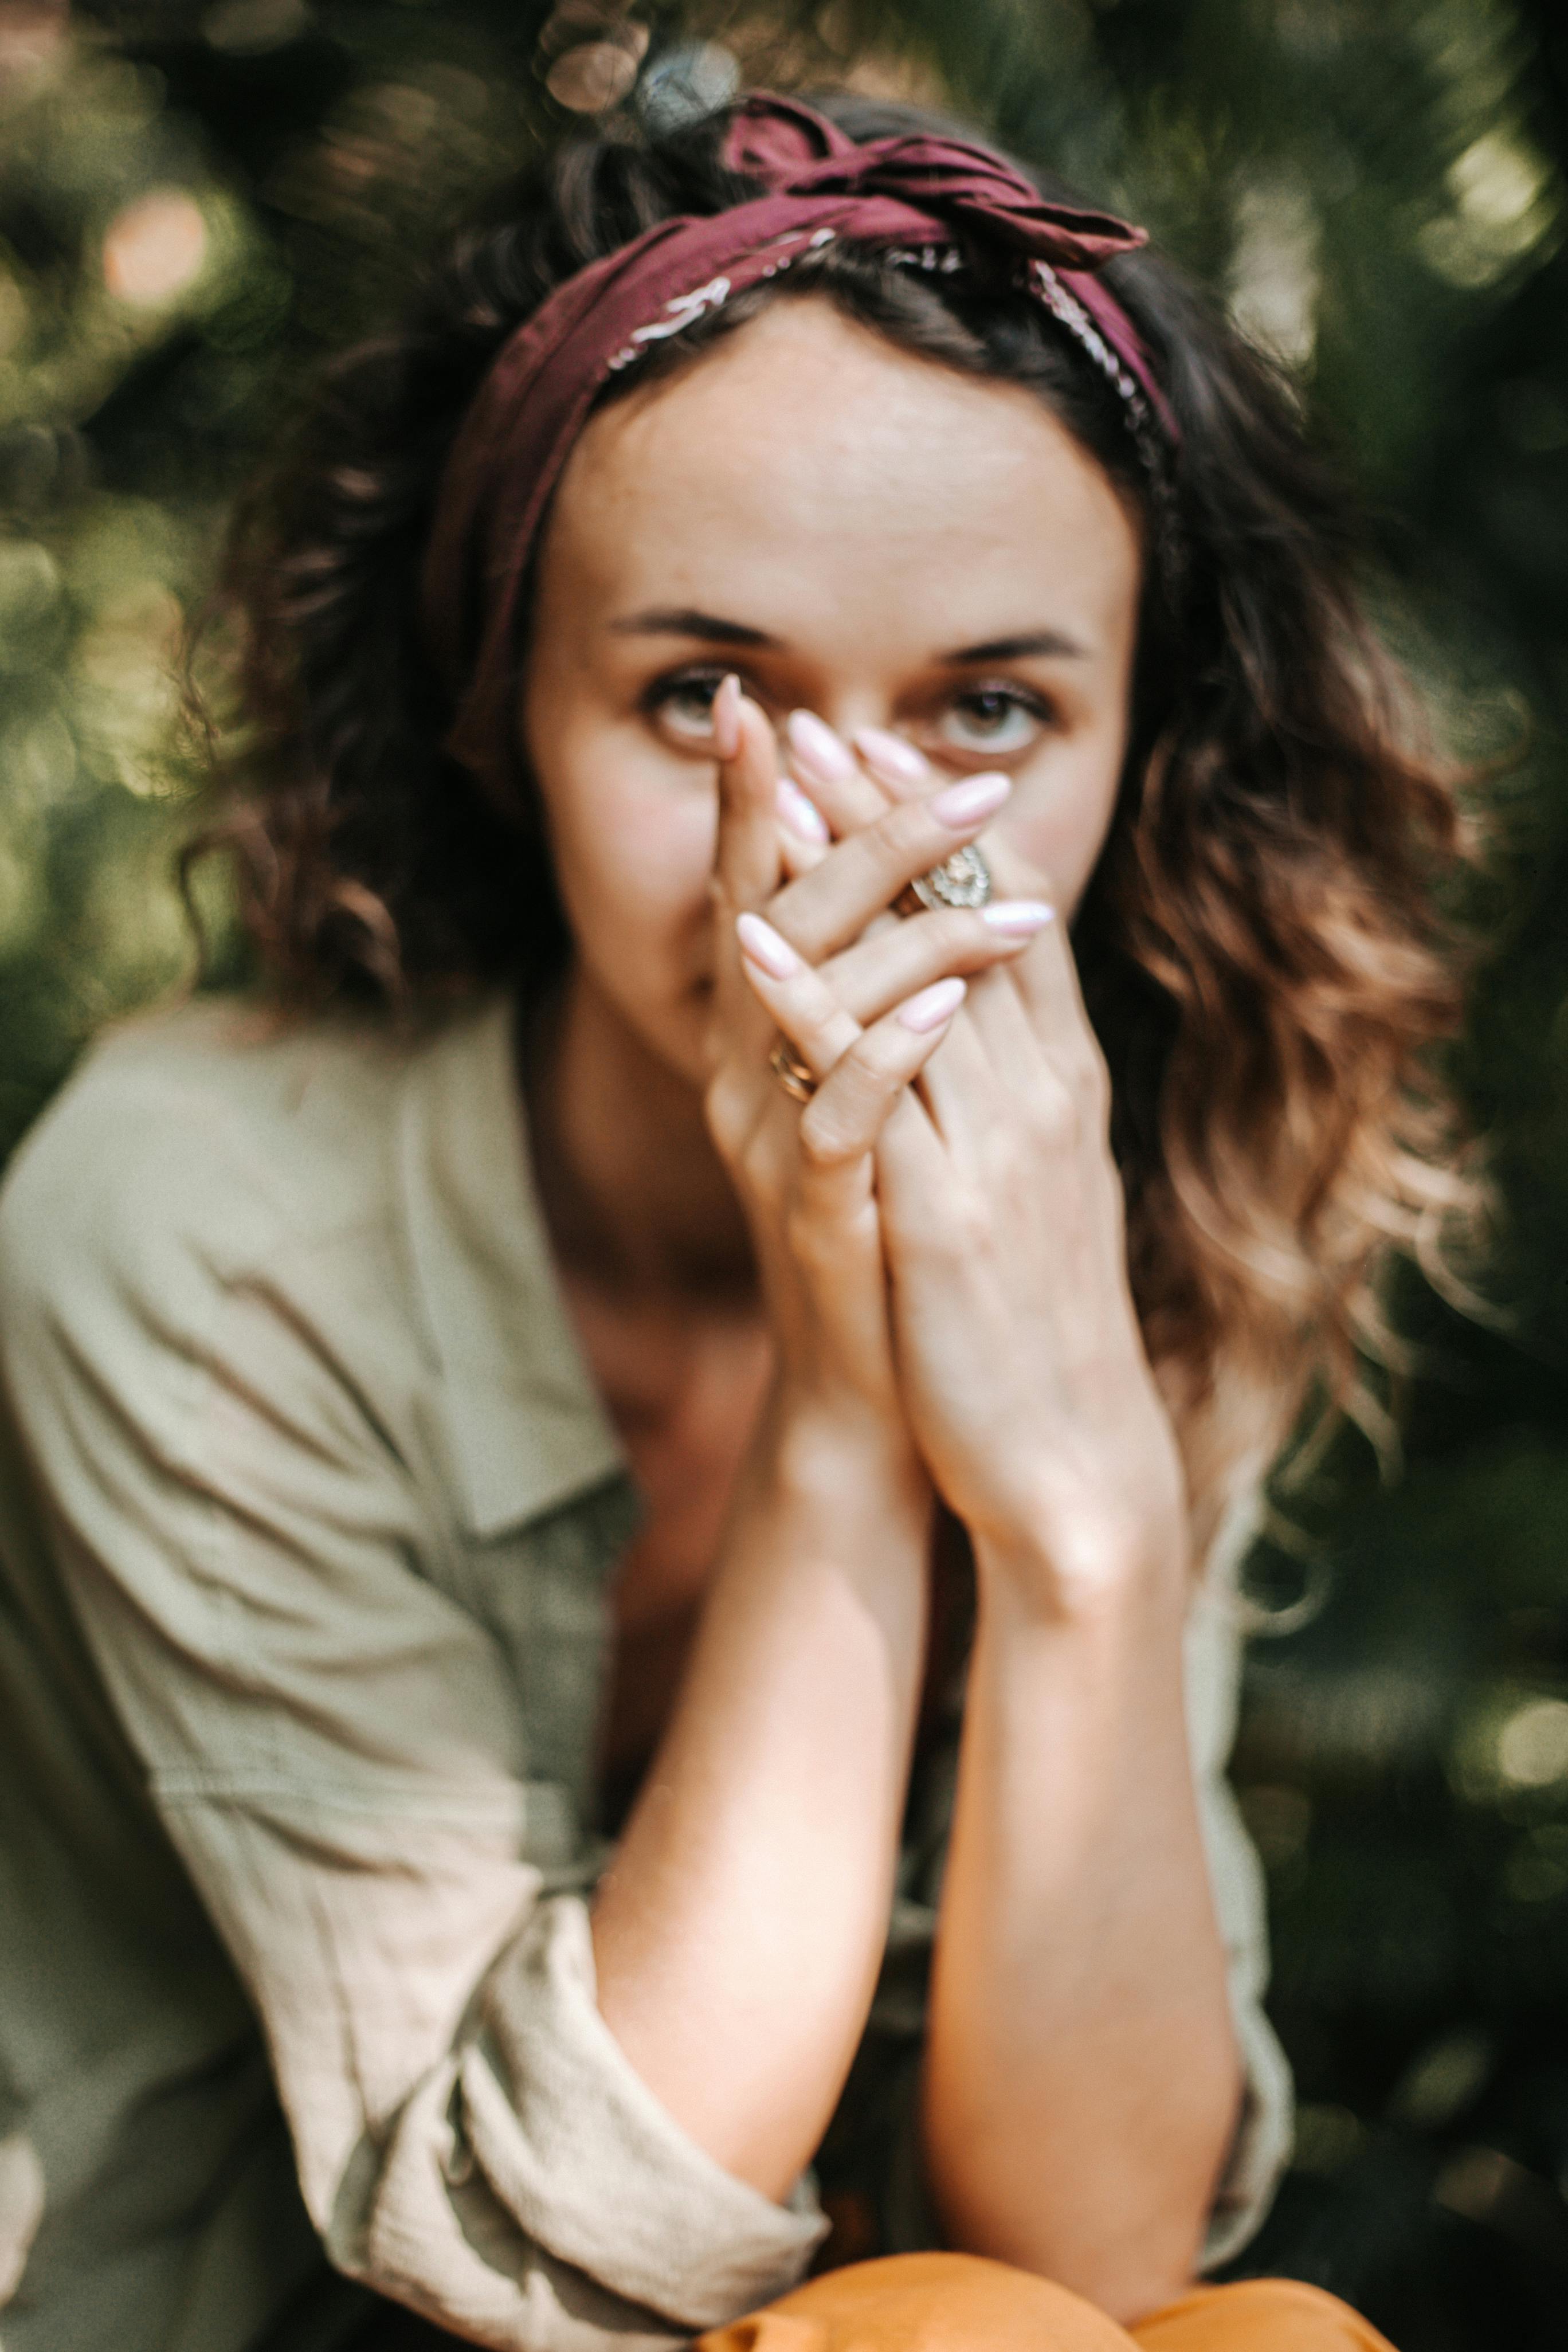 A woman covering her mouth and face in embarrassment | Source: Pexels